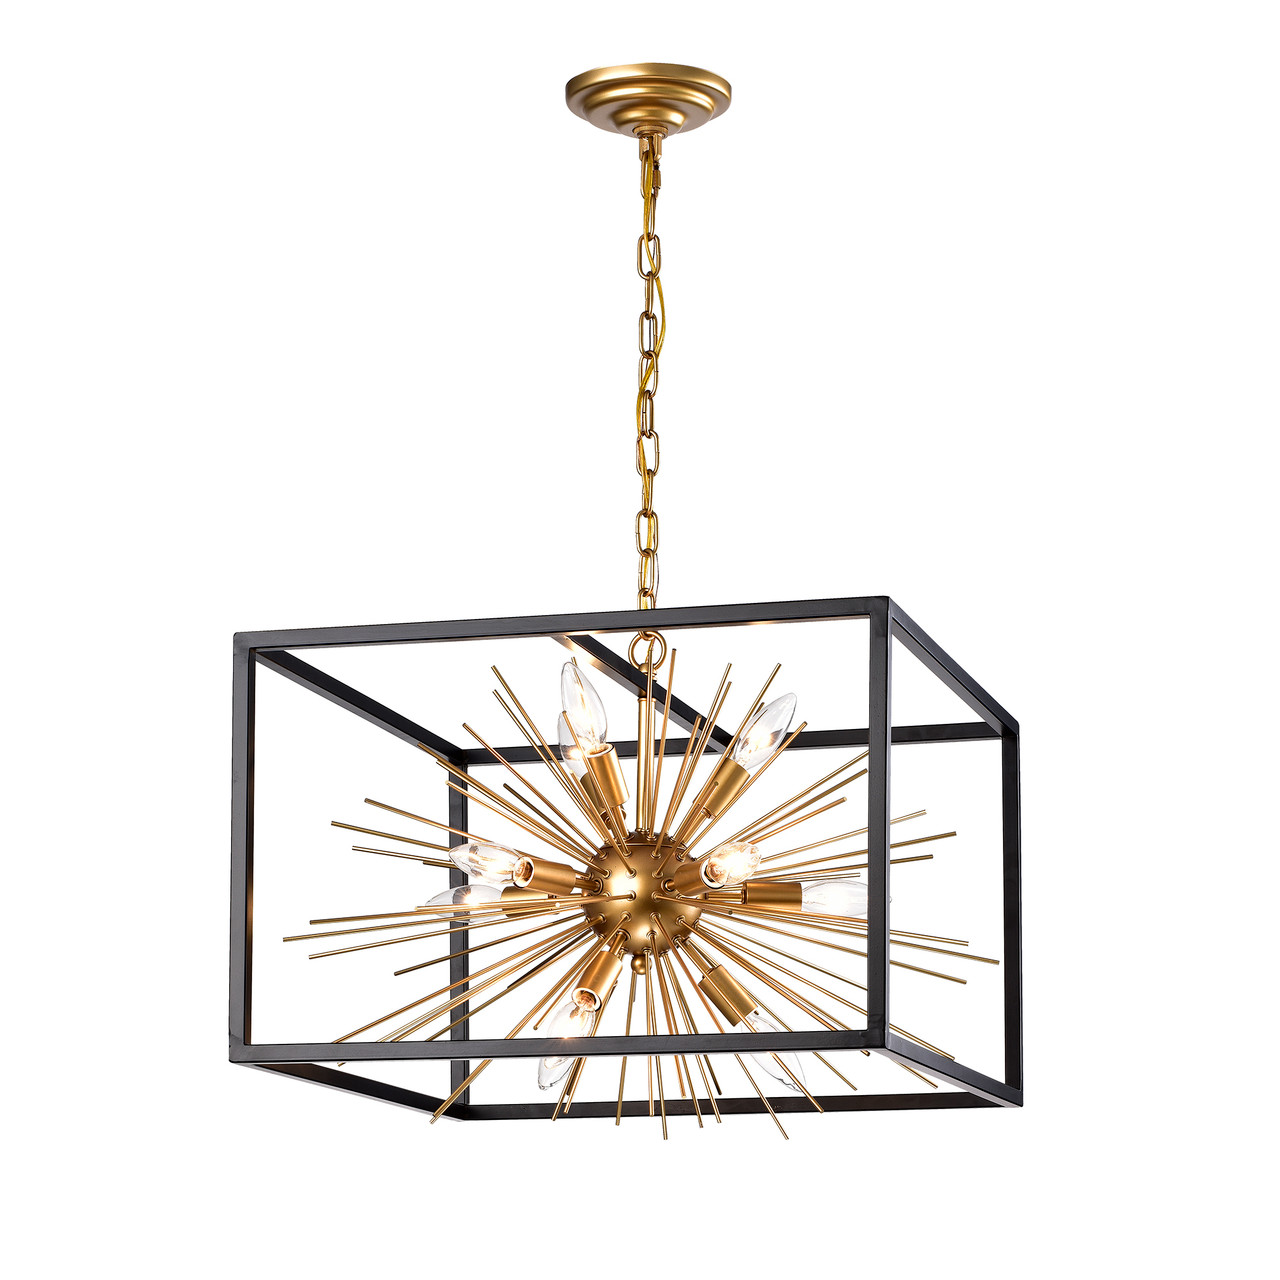 WAREHOUSE OF TIFFANY'S IMP11 Dharde 20.08 in. 11-Light Indoor Bronze Finish Chandelier with Light Kit